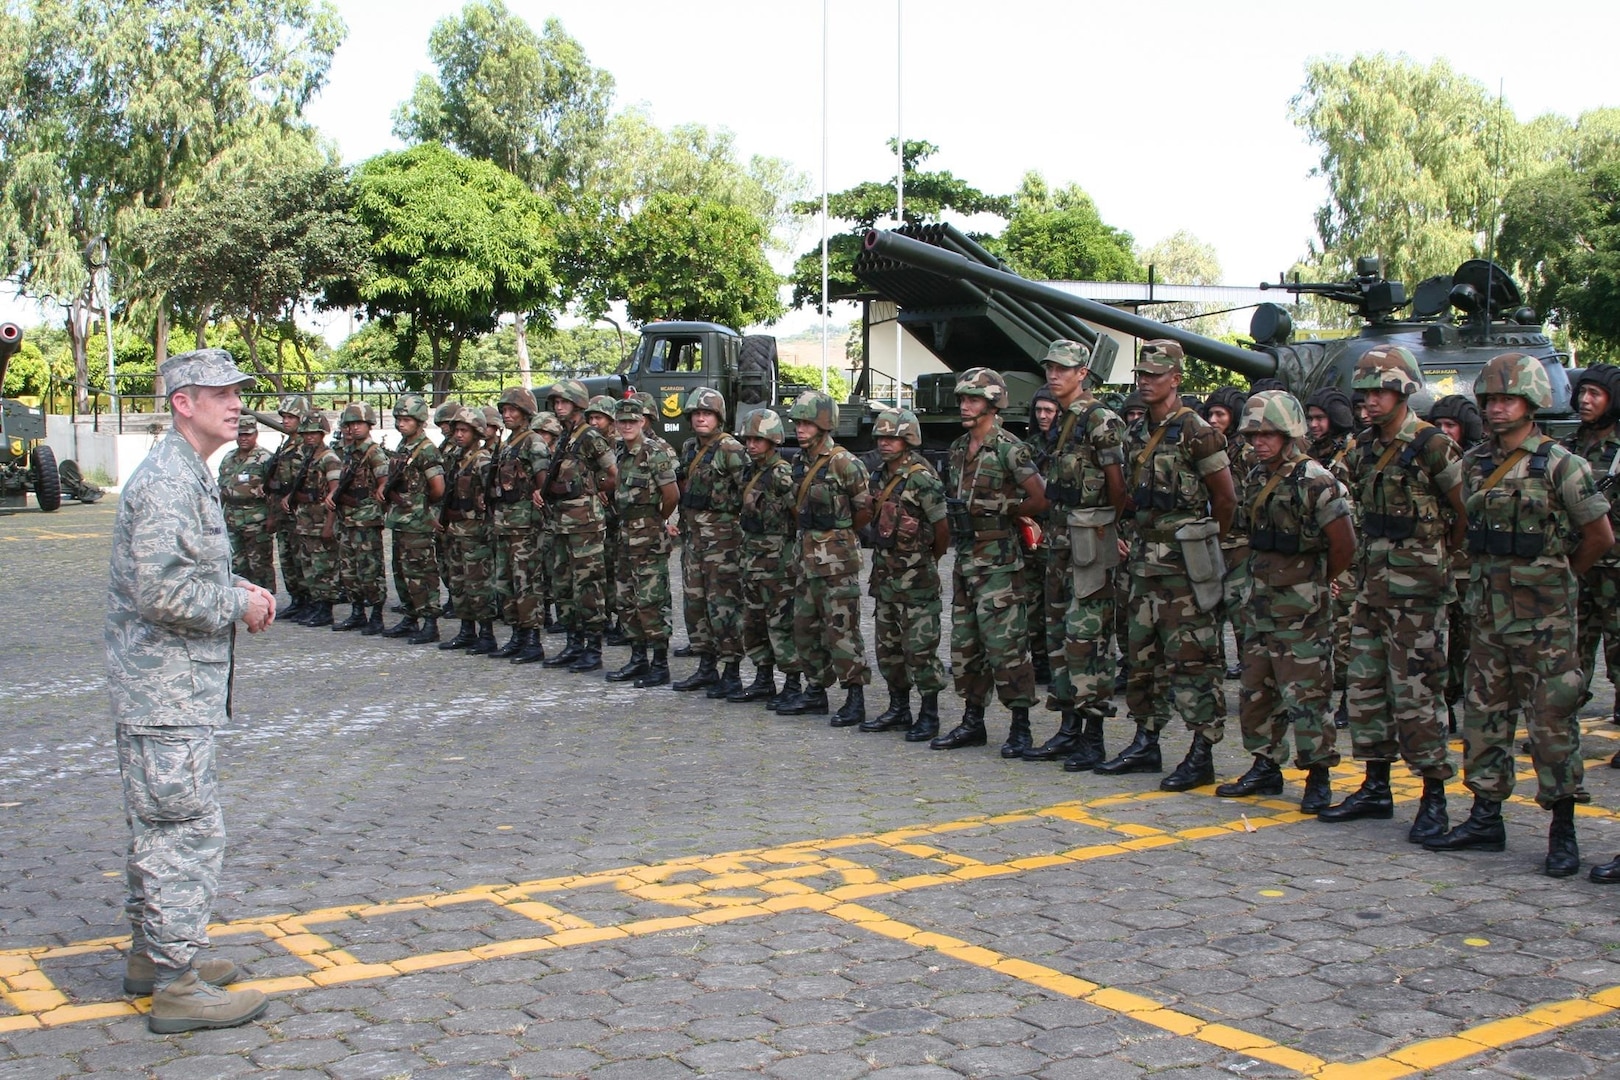 Key officers of the Wisconsin National Guard pay a goodwill visit to Nicaragua, hosted by Nicaragua's Ejercito (defense force). Wisconsin has a longstanding sister-state relationship with Nicaragua, and the Wisconsin National Guard is paired with the Nicaraguan Ejercito in the National Guard State Partnership Program.